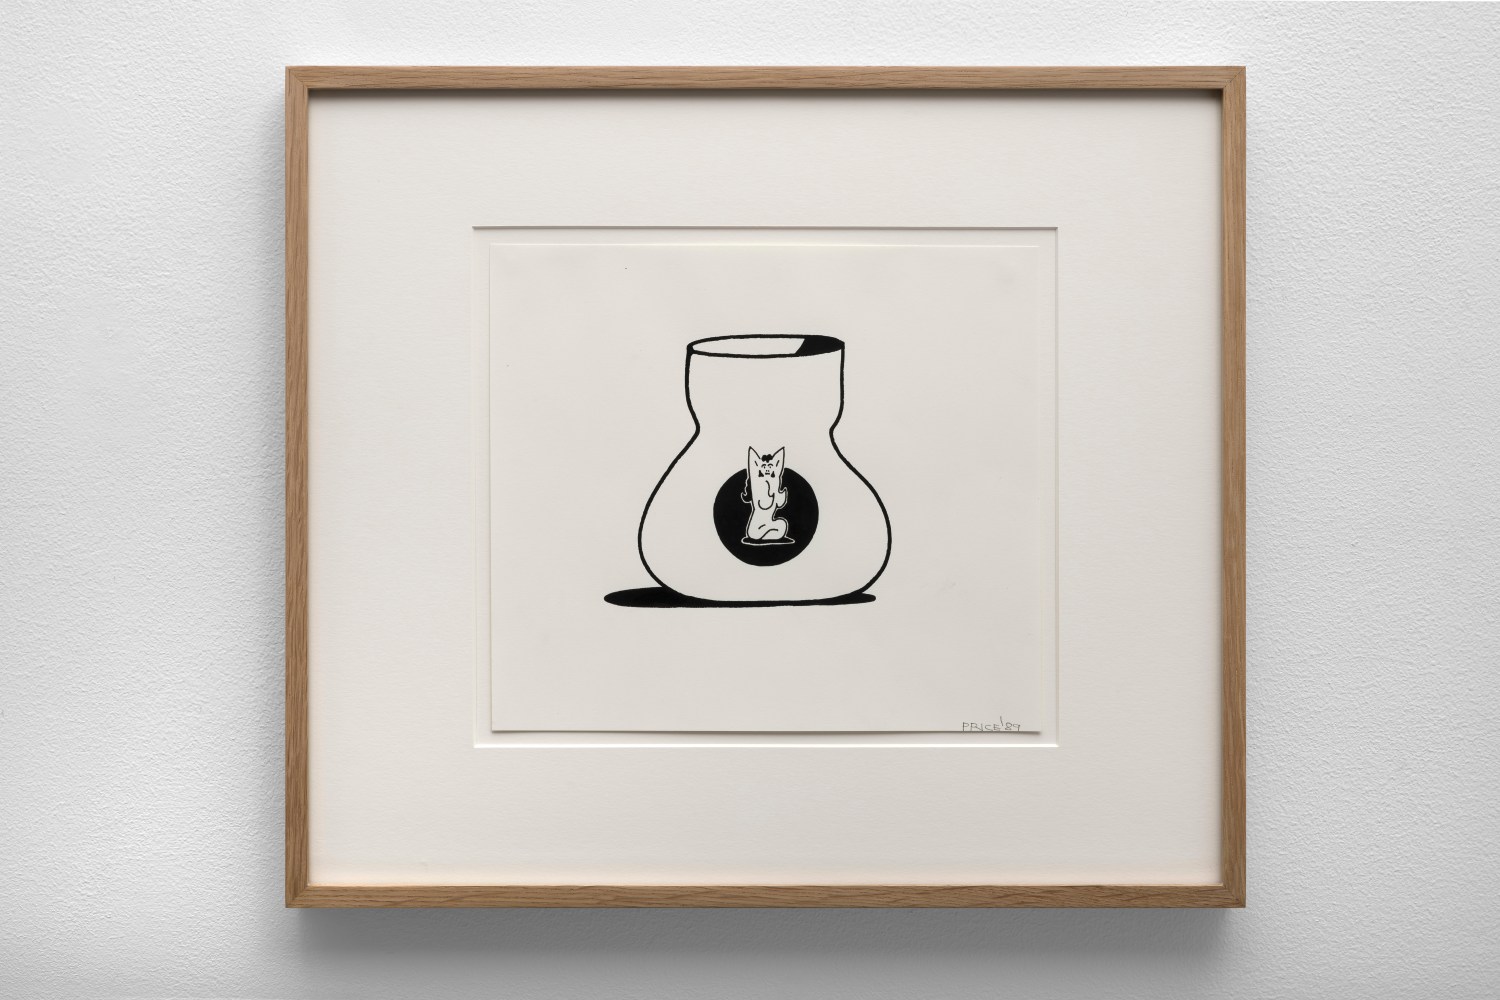 Girl on Vase, 1989 ink on paper 8 1/4 x 9 1/2 inches; 21 x 24.1 centimeters LSFA# 15050